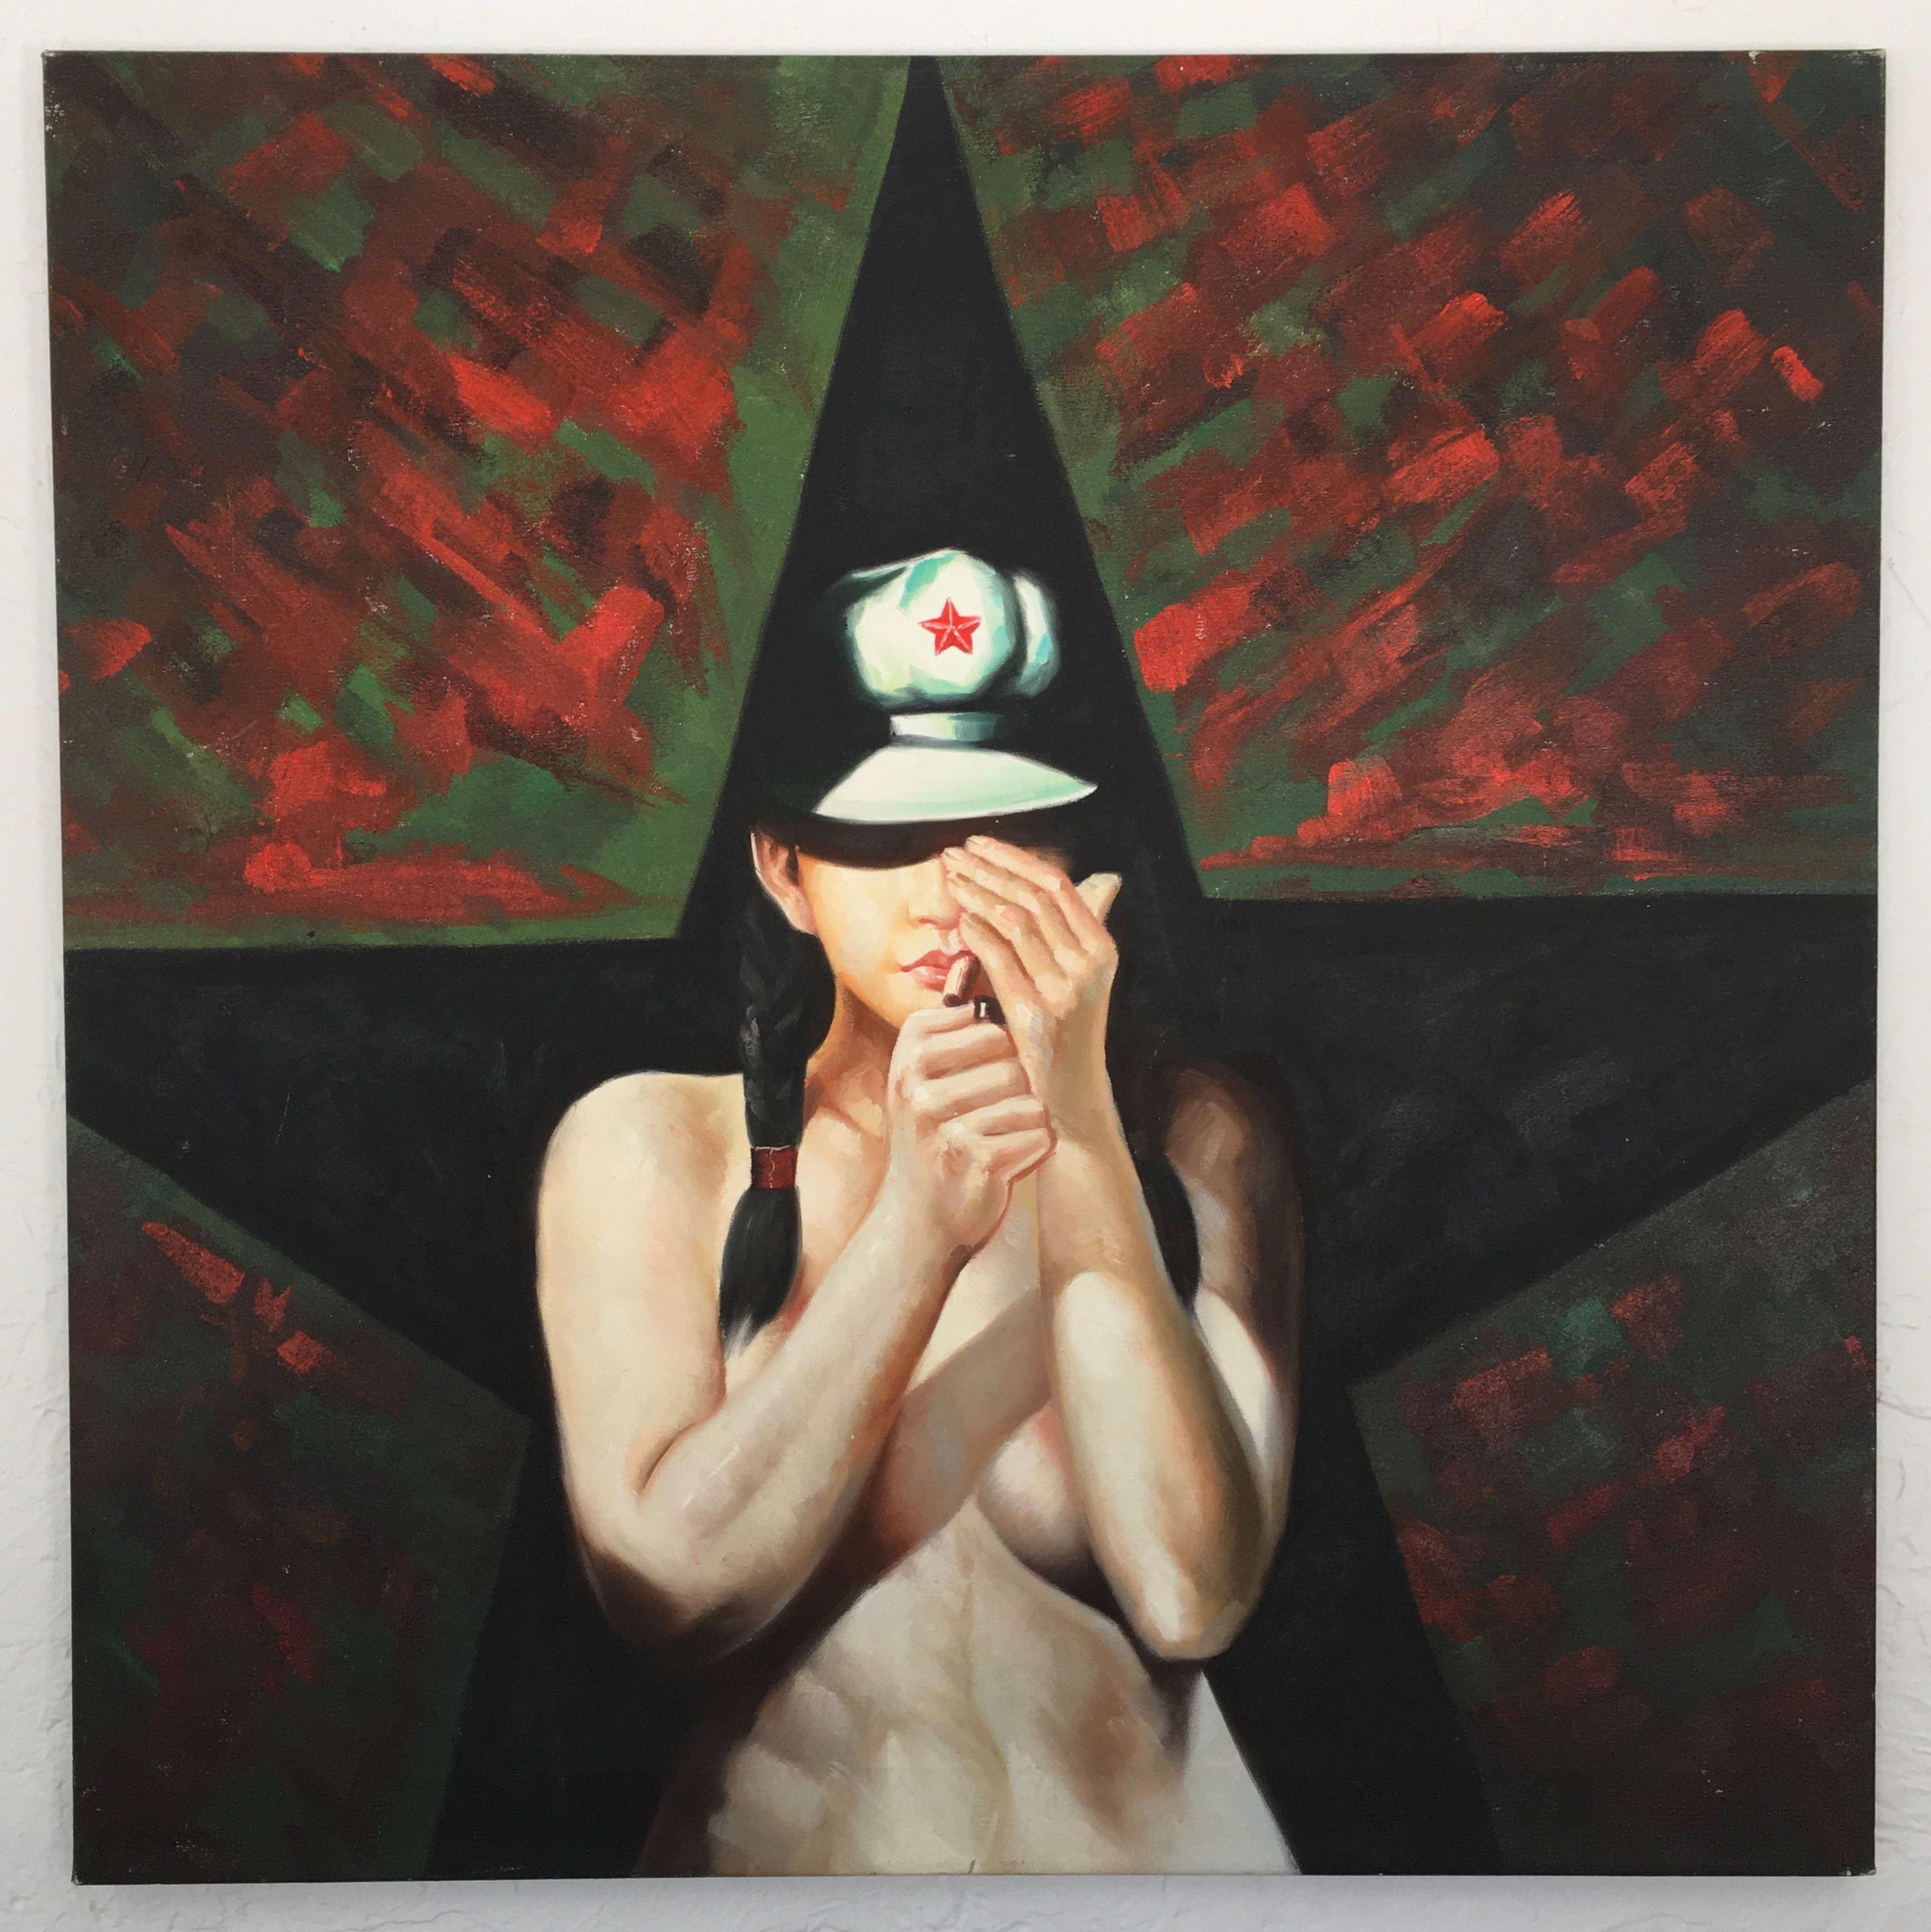 This large acrylic on canvas painting, 'Chinese Female Nude Pop Art,' is 36" x 35.75"  by an Unknown artist. It is a Pop Art work, depicting a female nude figure in the forefront, taking up the center of the composition. The figure, presumably